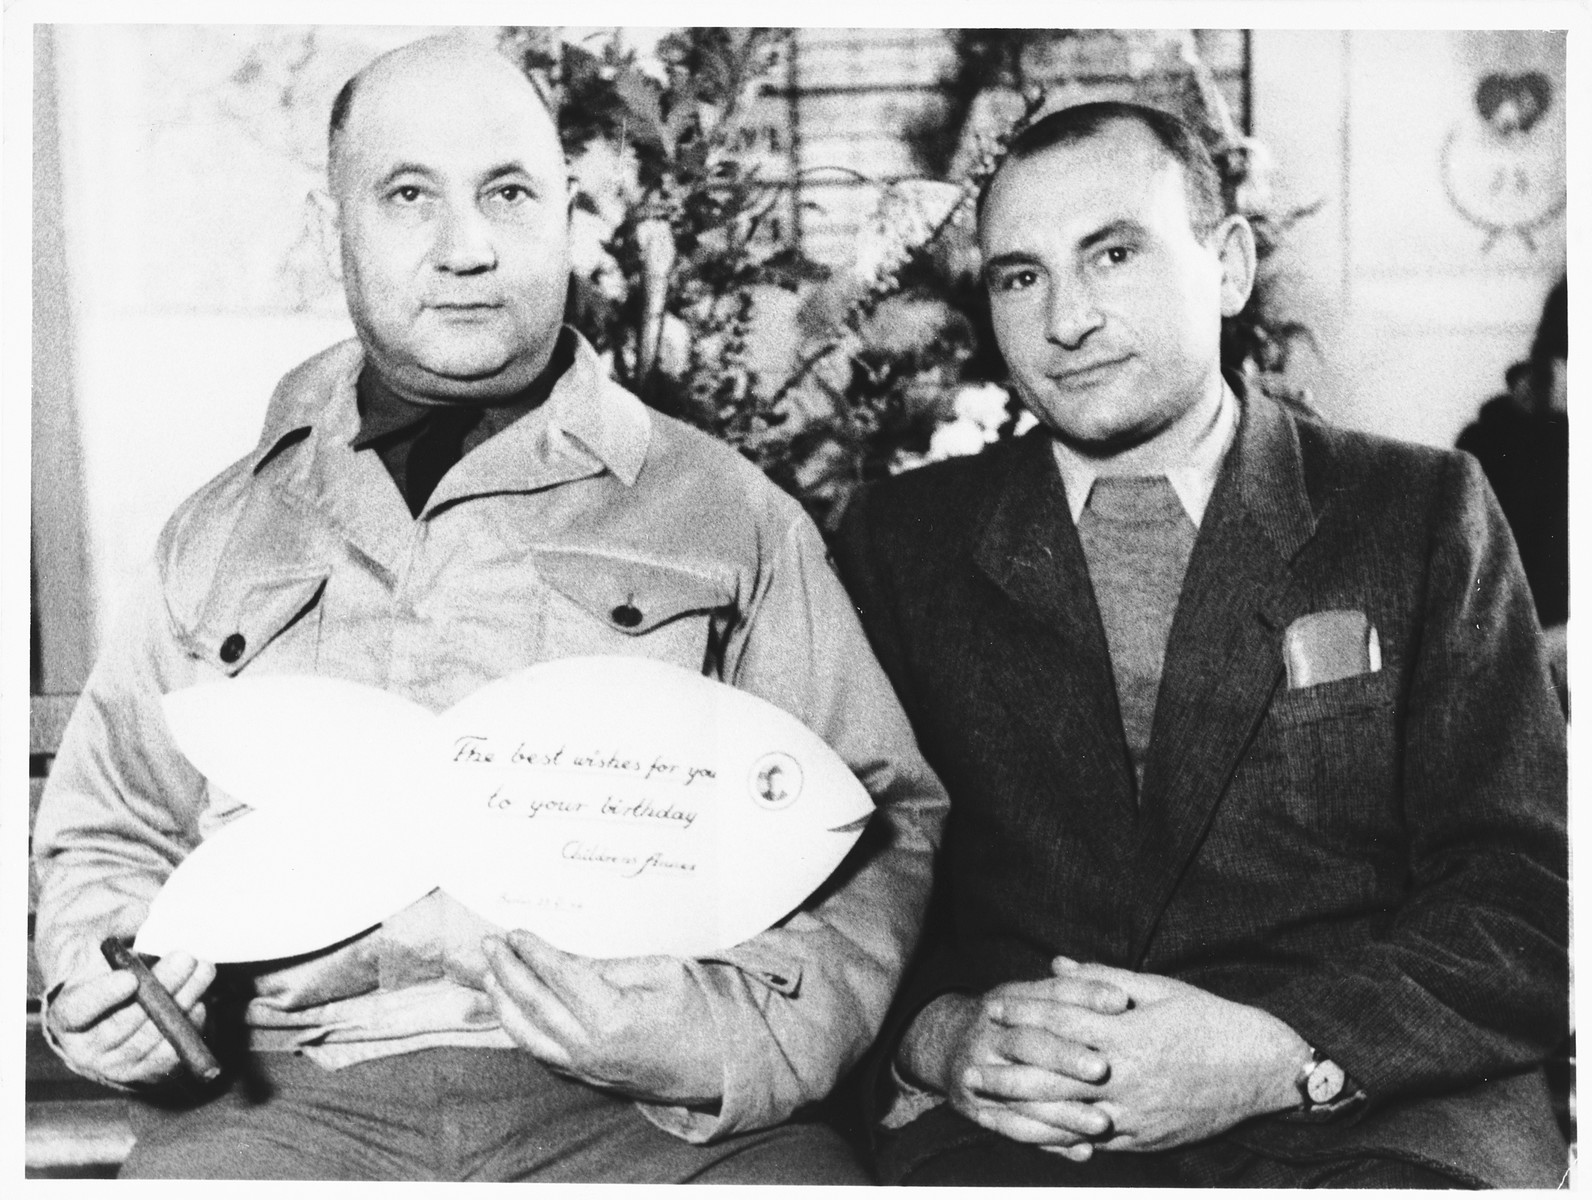 UNRRA camp director, Harold Fishbein (left), holds up a birthday card shaped like a fish, which he received from the children in the Schlachtensee displaced persons camp.

Pincus Proszowski (later Peter Prosaw) is pictured on the right. A survivor of the Lodz ghetto and Auschwitz, he was the director of the Schlachtensee children's home and the graphic designer who made the camp scrapbook.